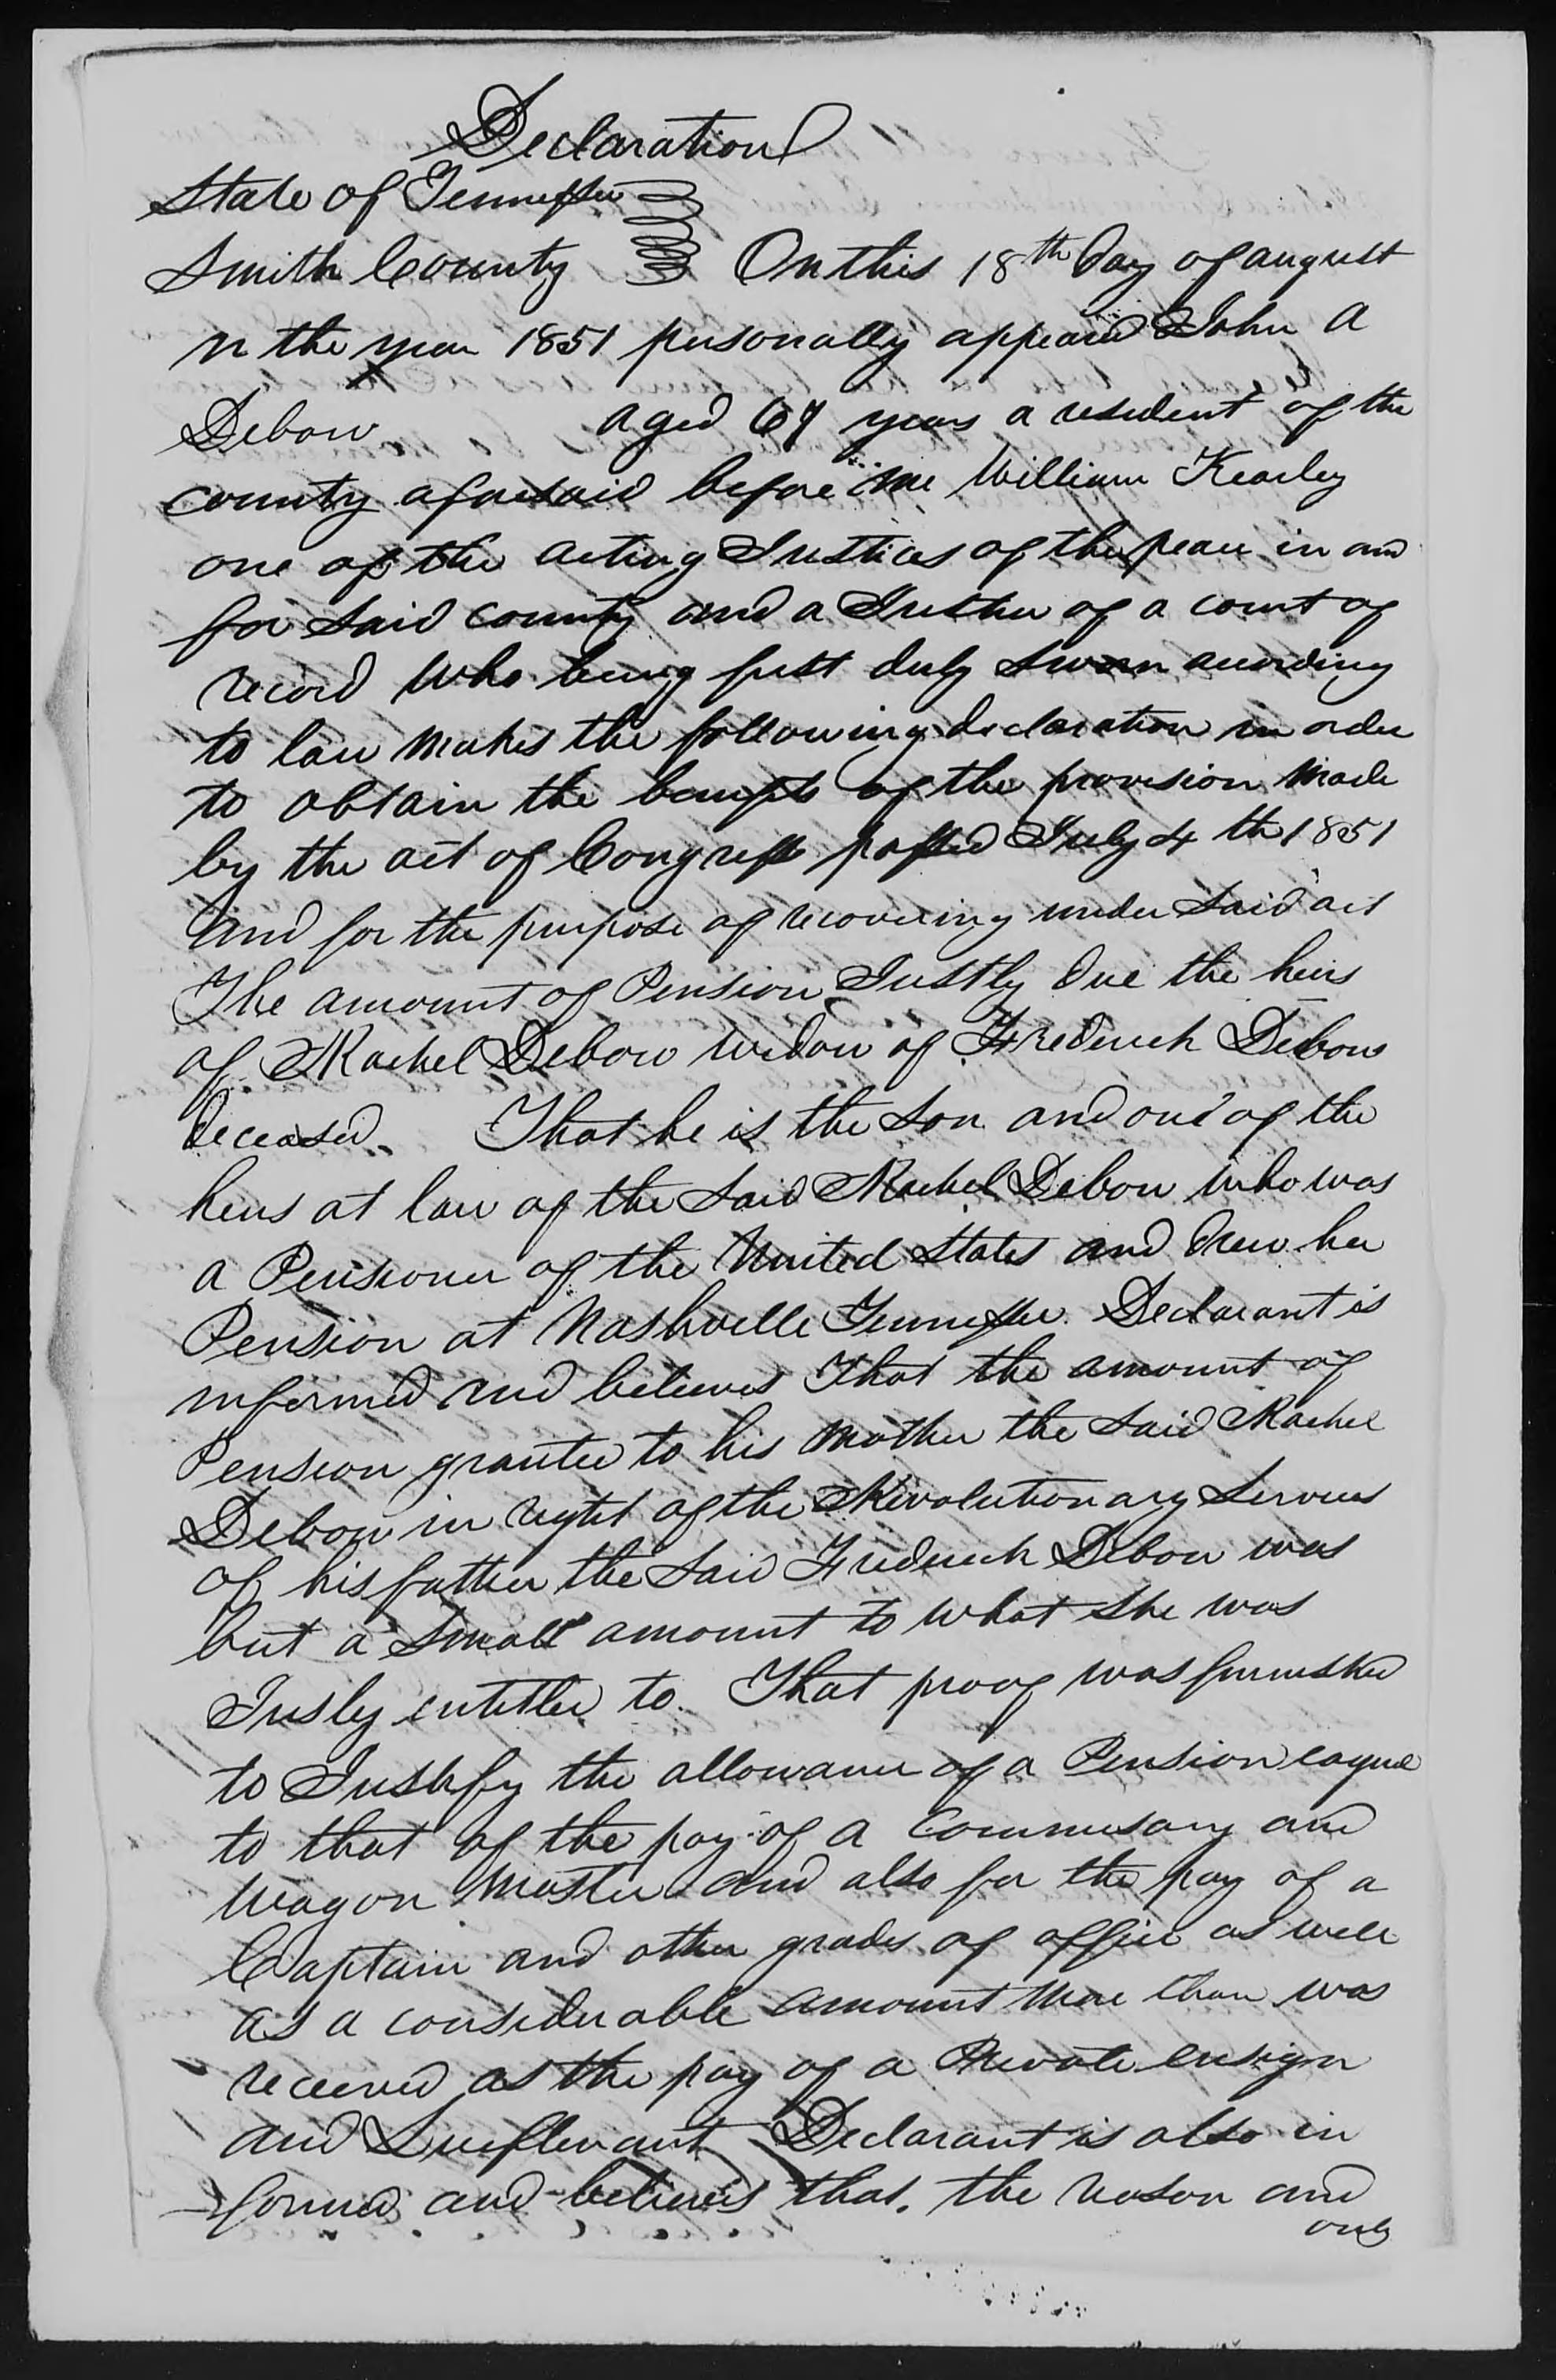 Declaration of John A. Debow to the U.S. Pension Office, 18 August 1851, page 1